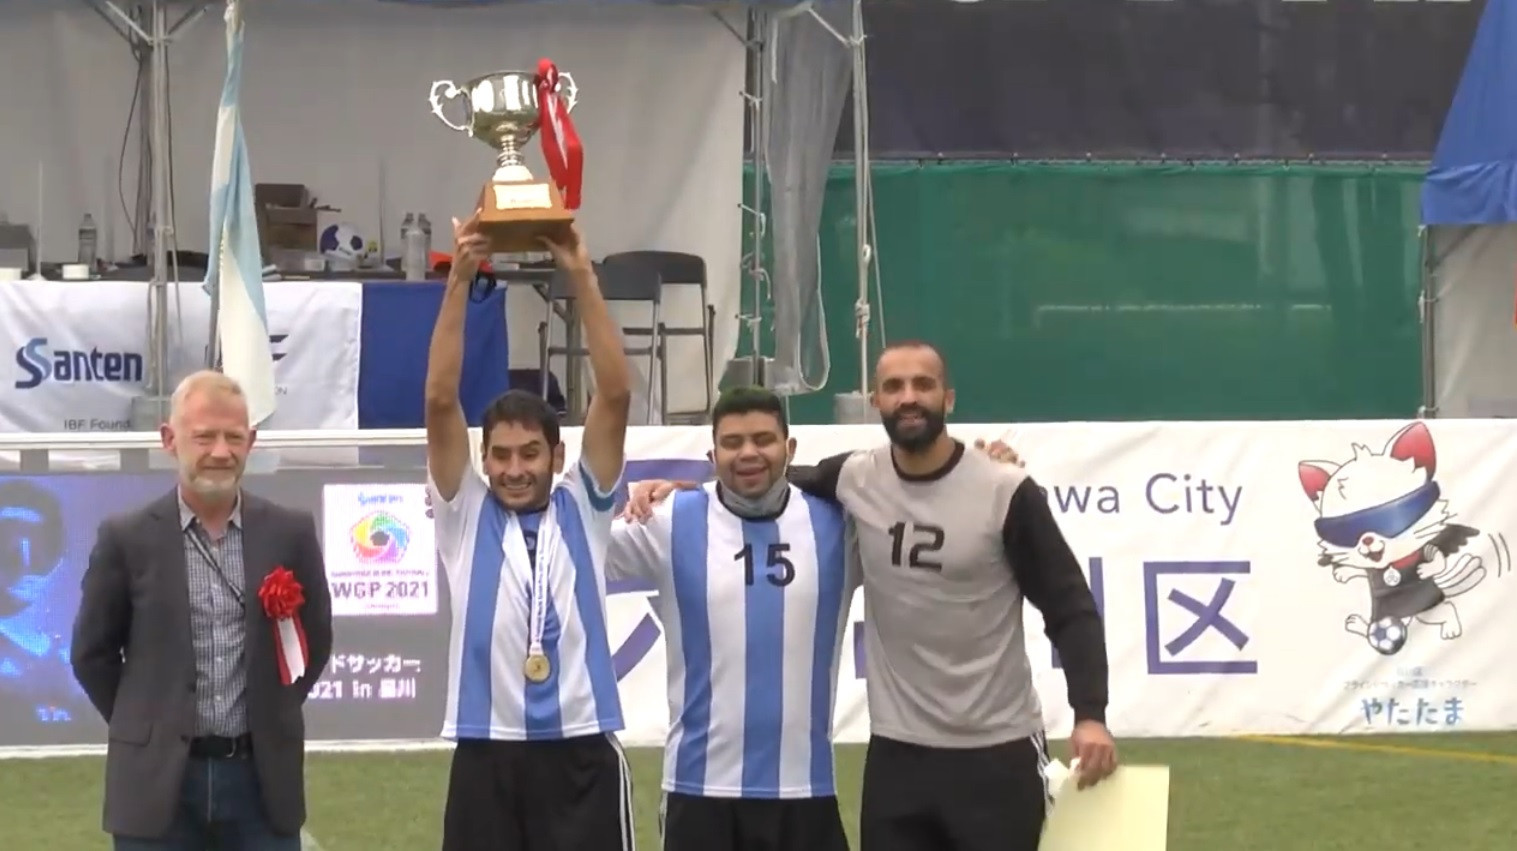 Argentina lift the Blind Football World Grand Prix trophy after beating Japan in the final ©IBSA Football